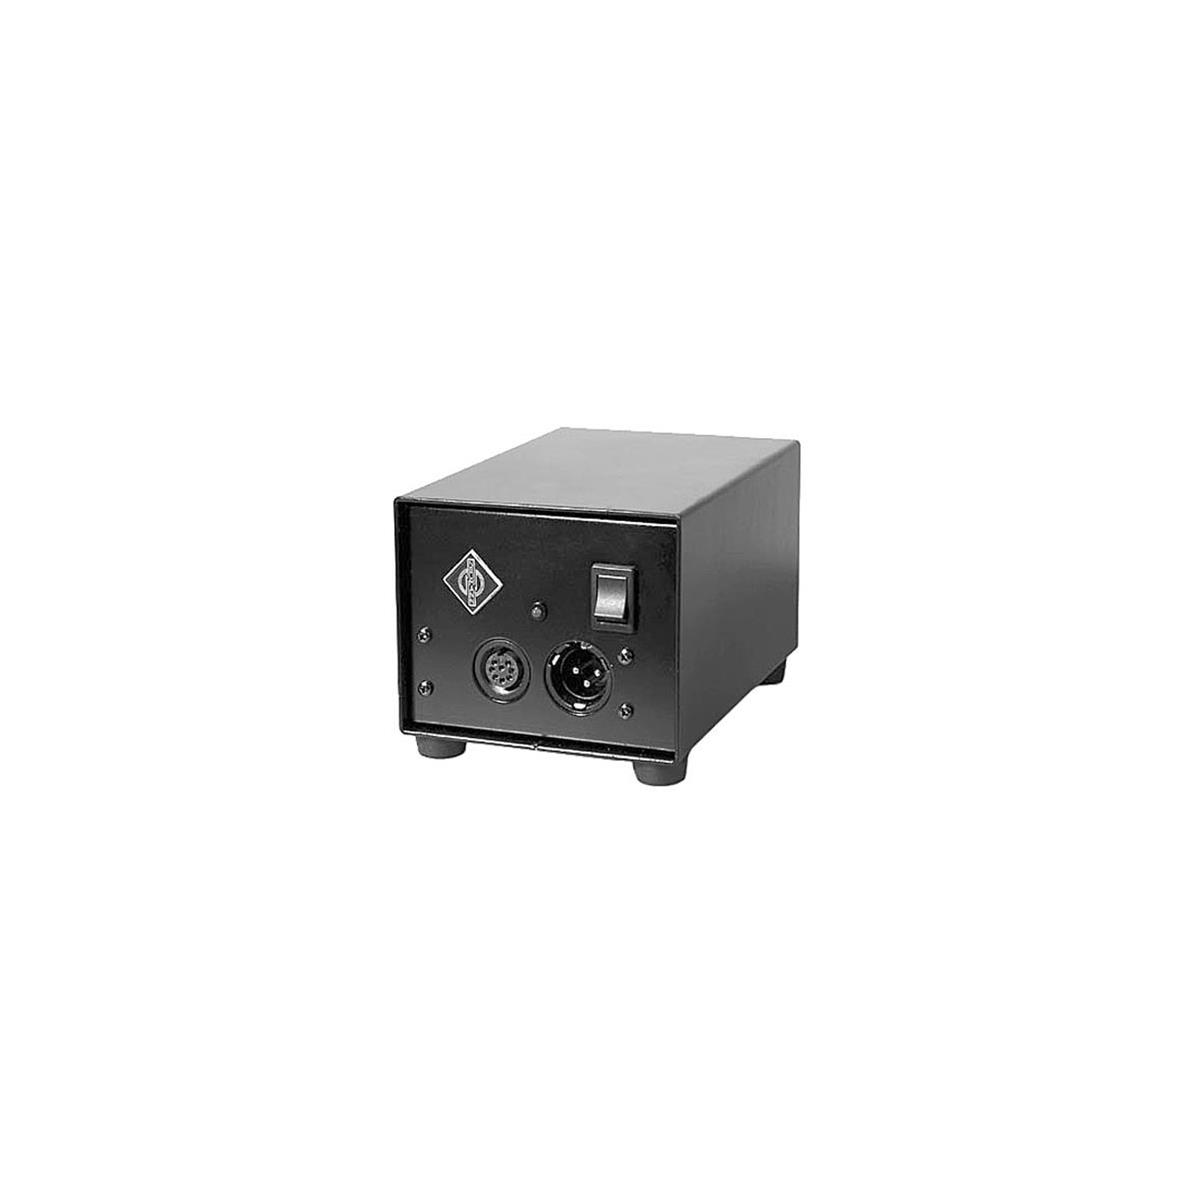 Image of Neumann Power Supply for M 147/M 149/M 150 Tube Microphones